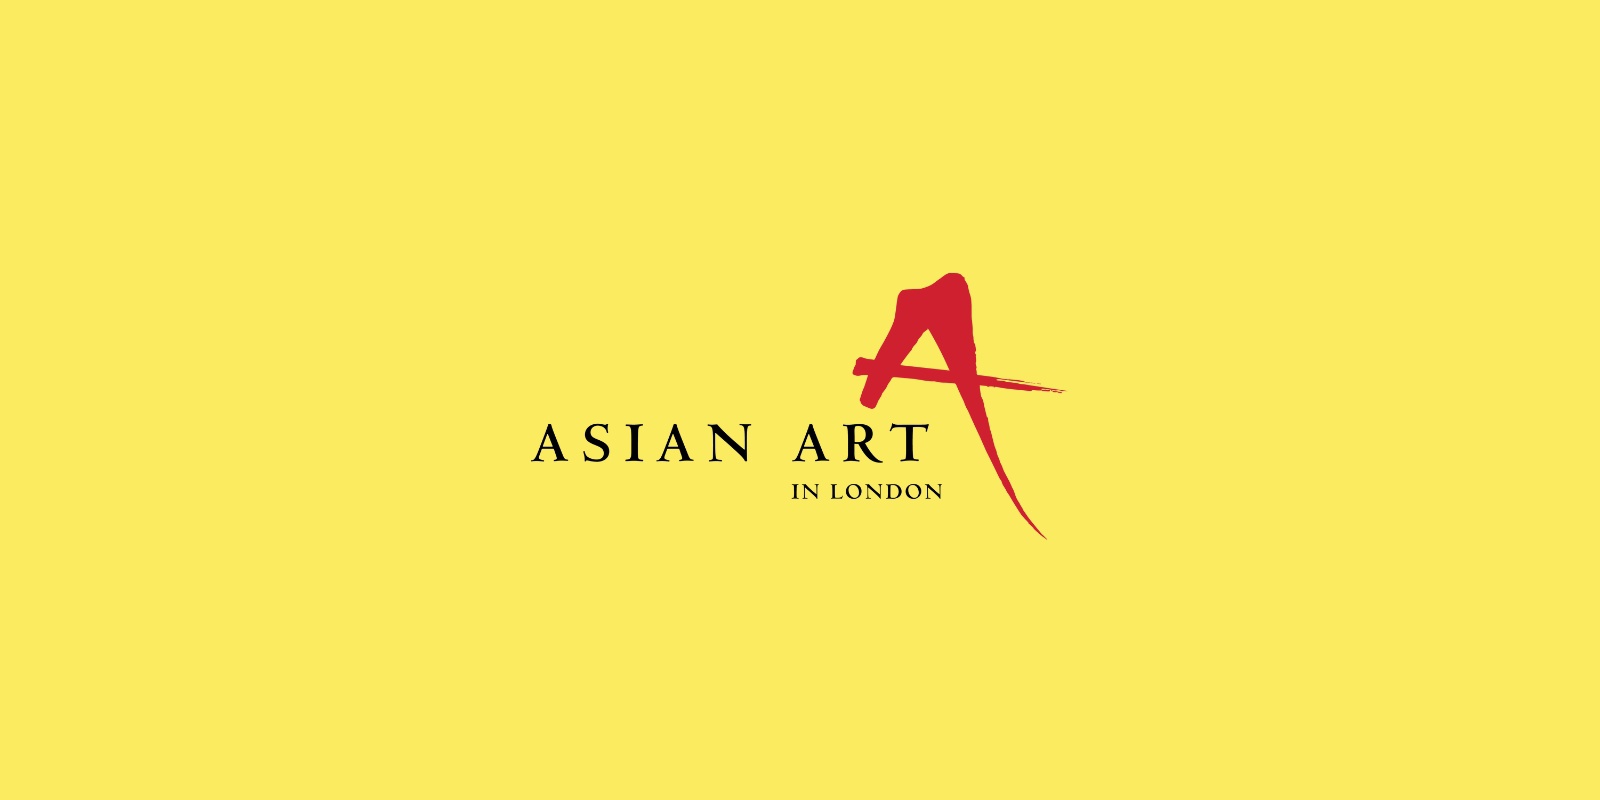 Asian Art in London - Evvnt Events